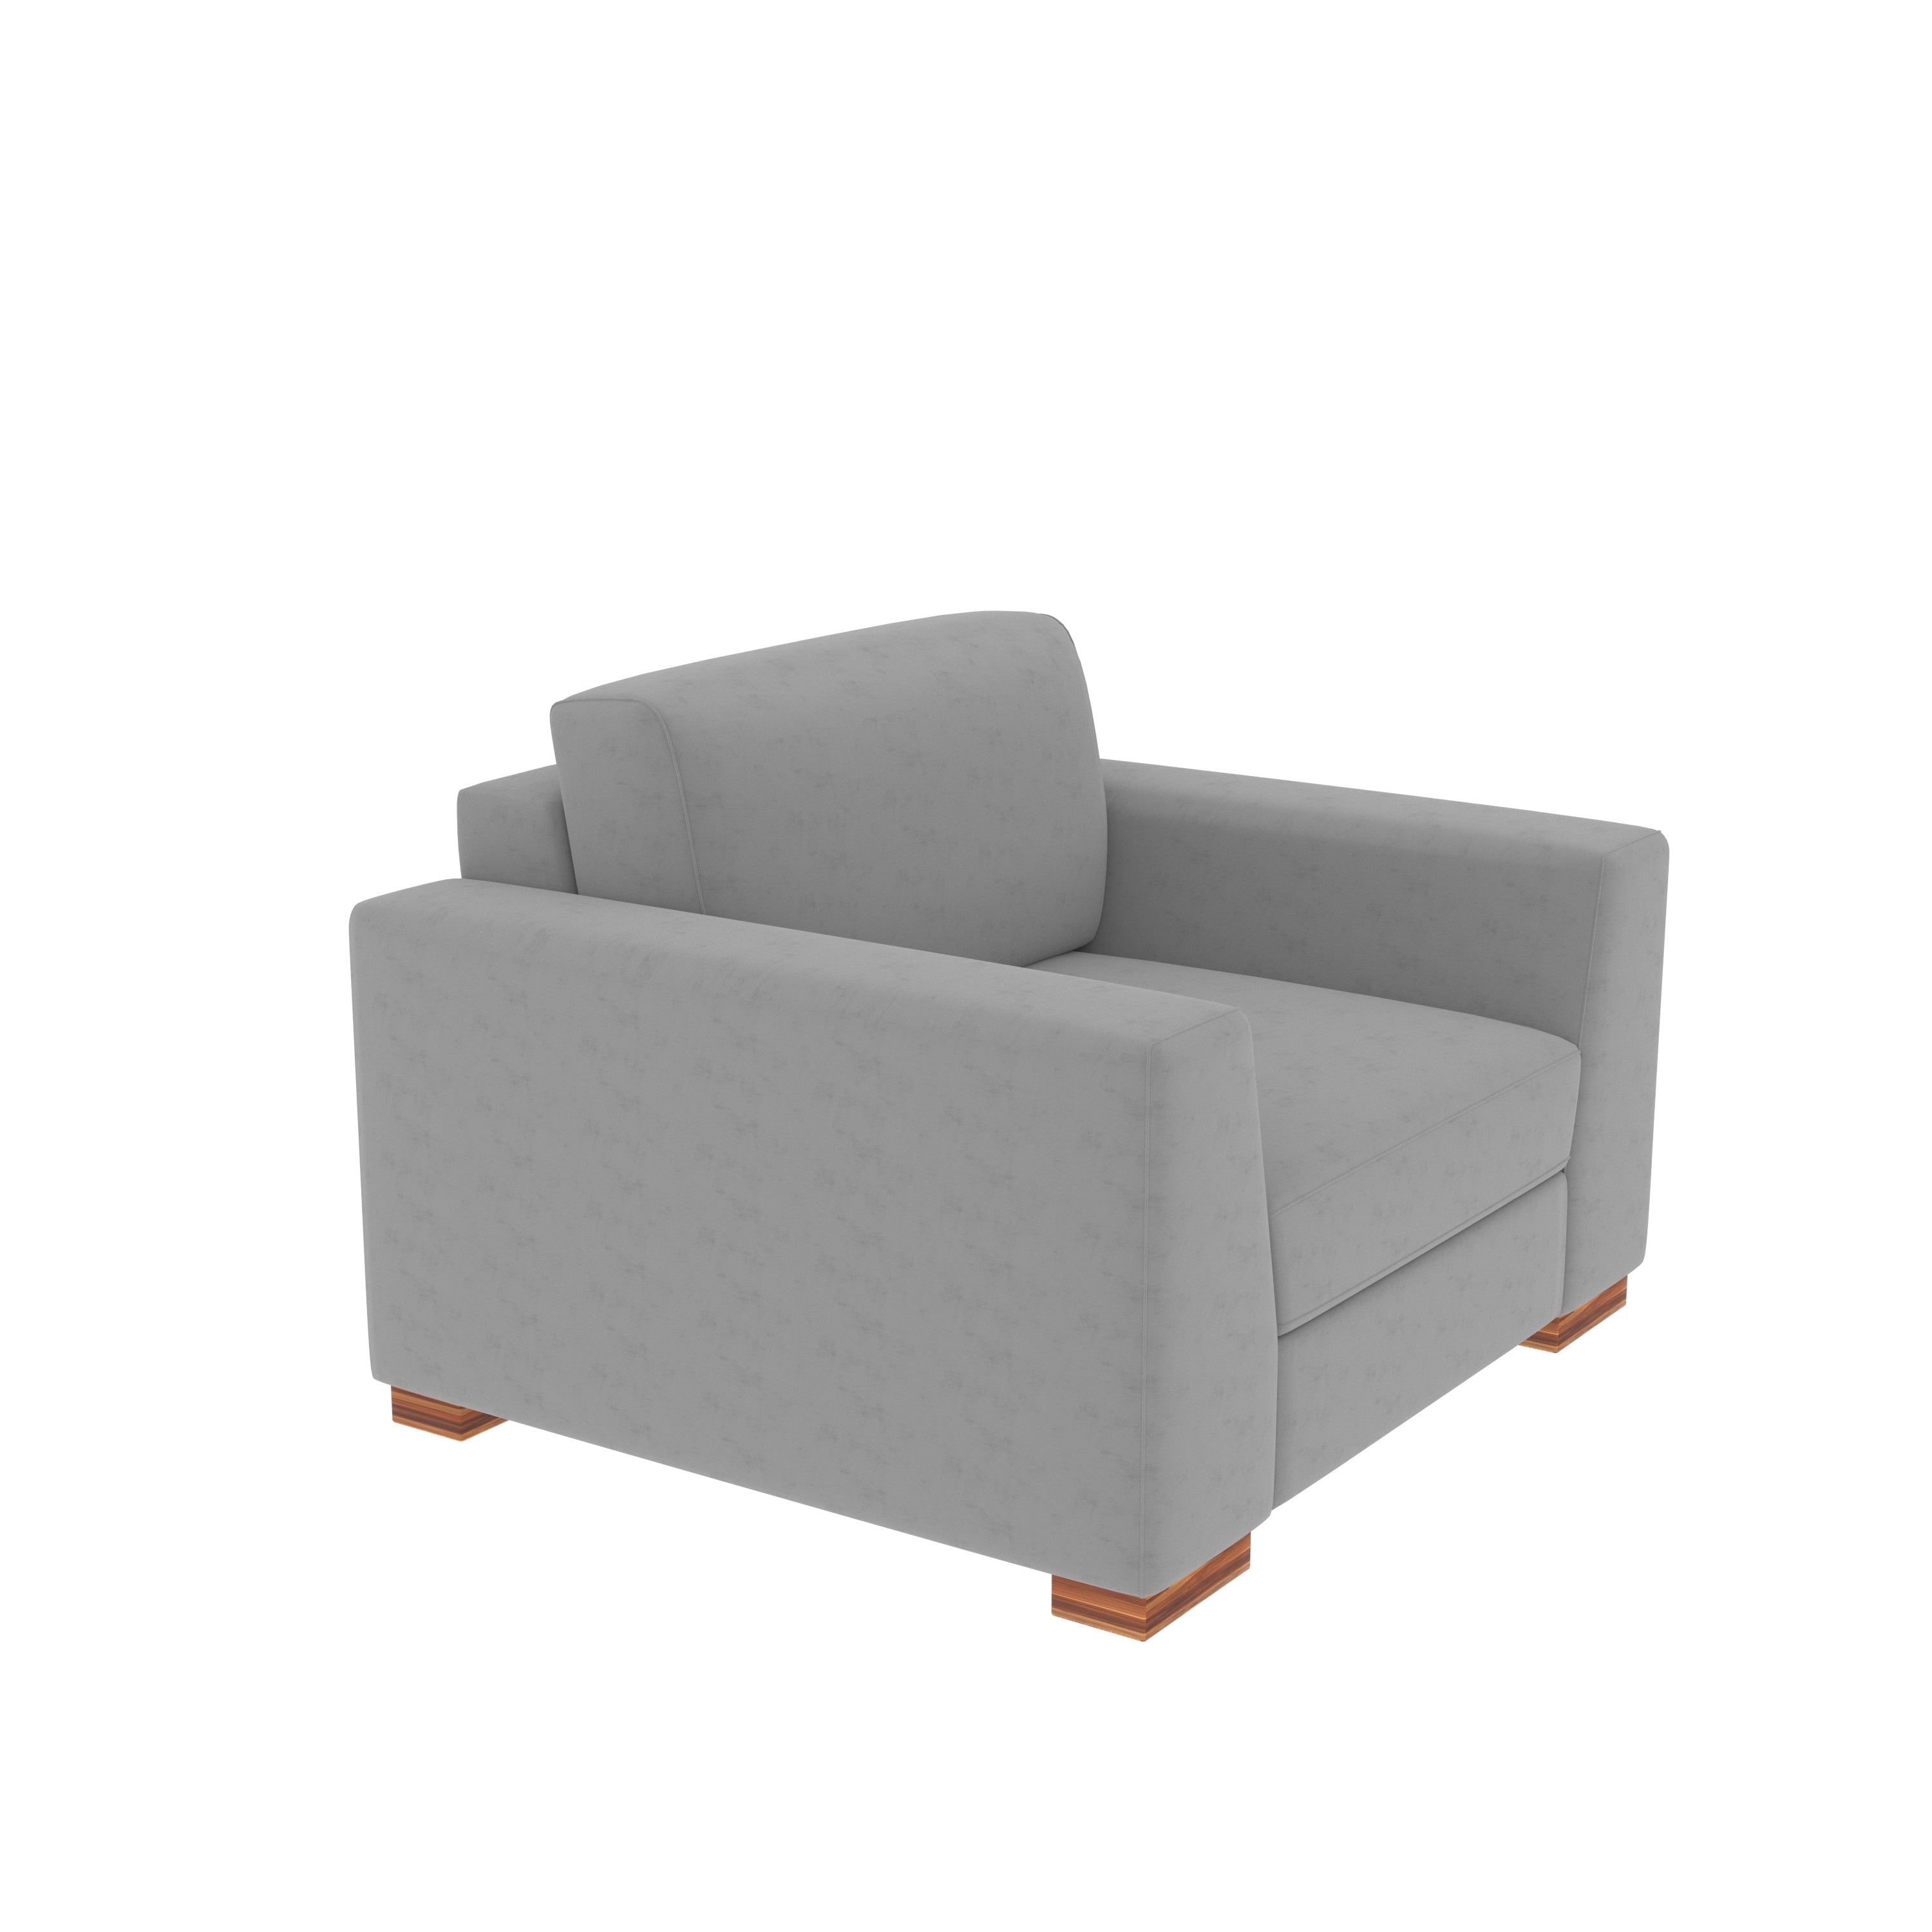 Warm Gray Pastel Coloured Comfort 2+1 Seater Sofa for Home Sofa